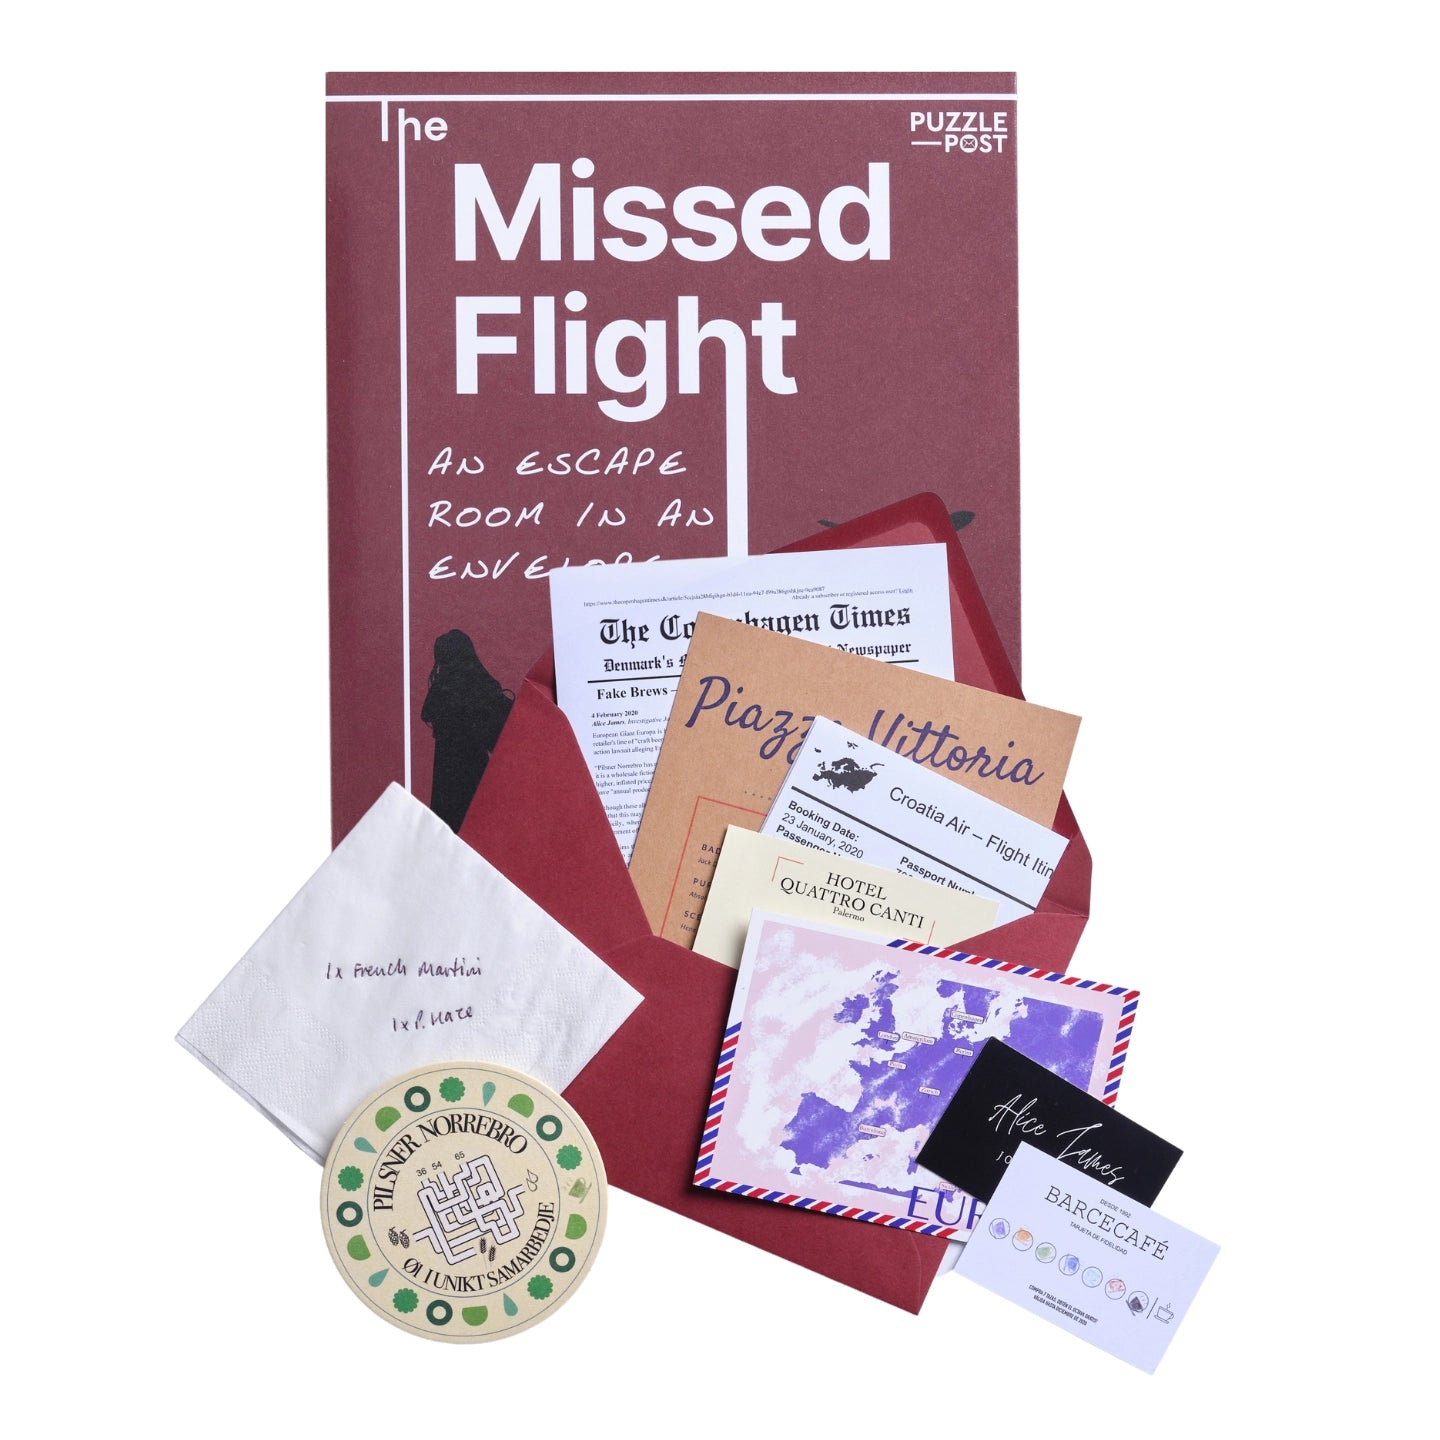 An Escape Room in an Envelope: The Missed Flight